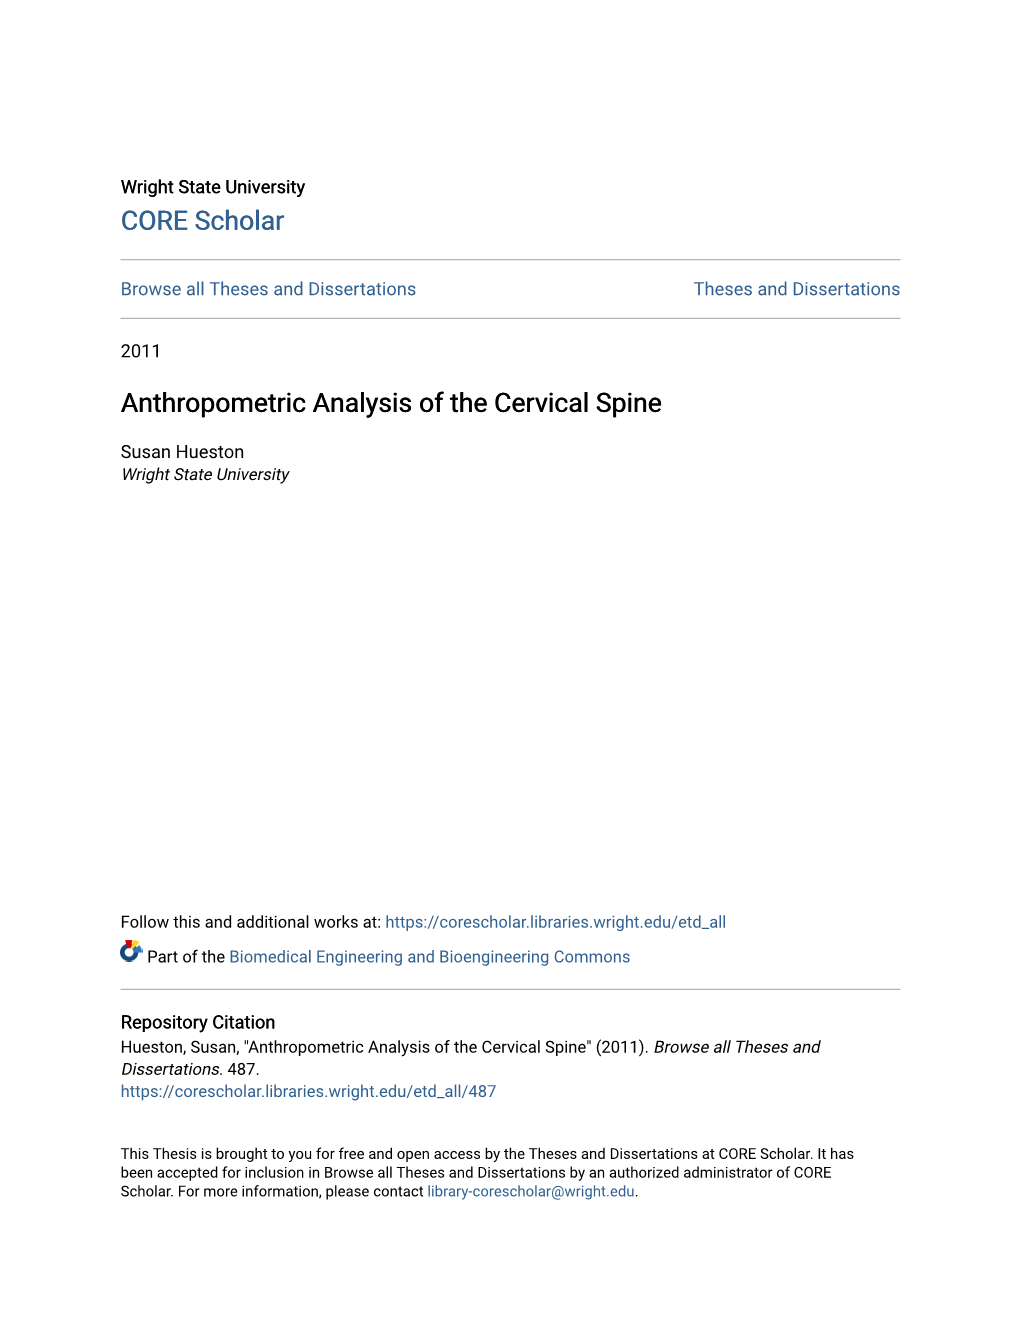 Anthropometric Analysis of the Cervical Spine